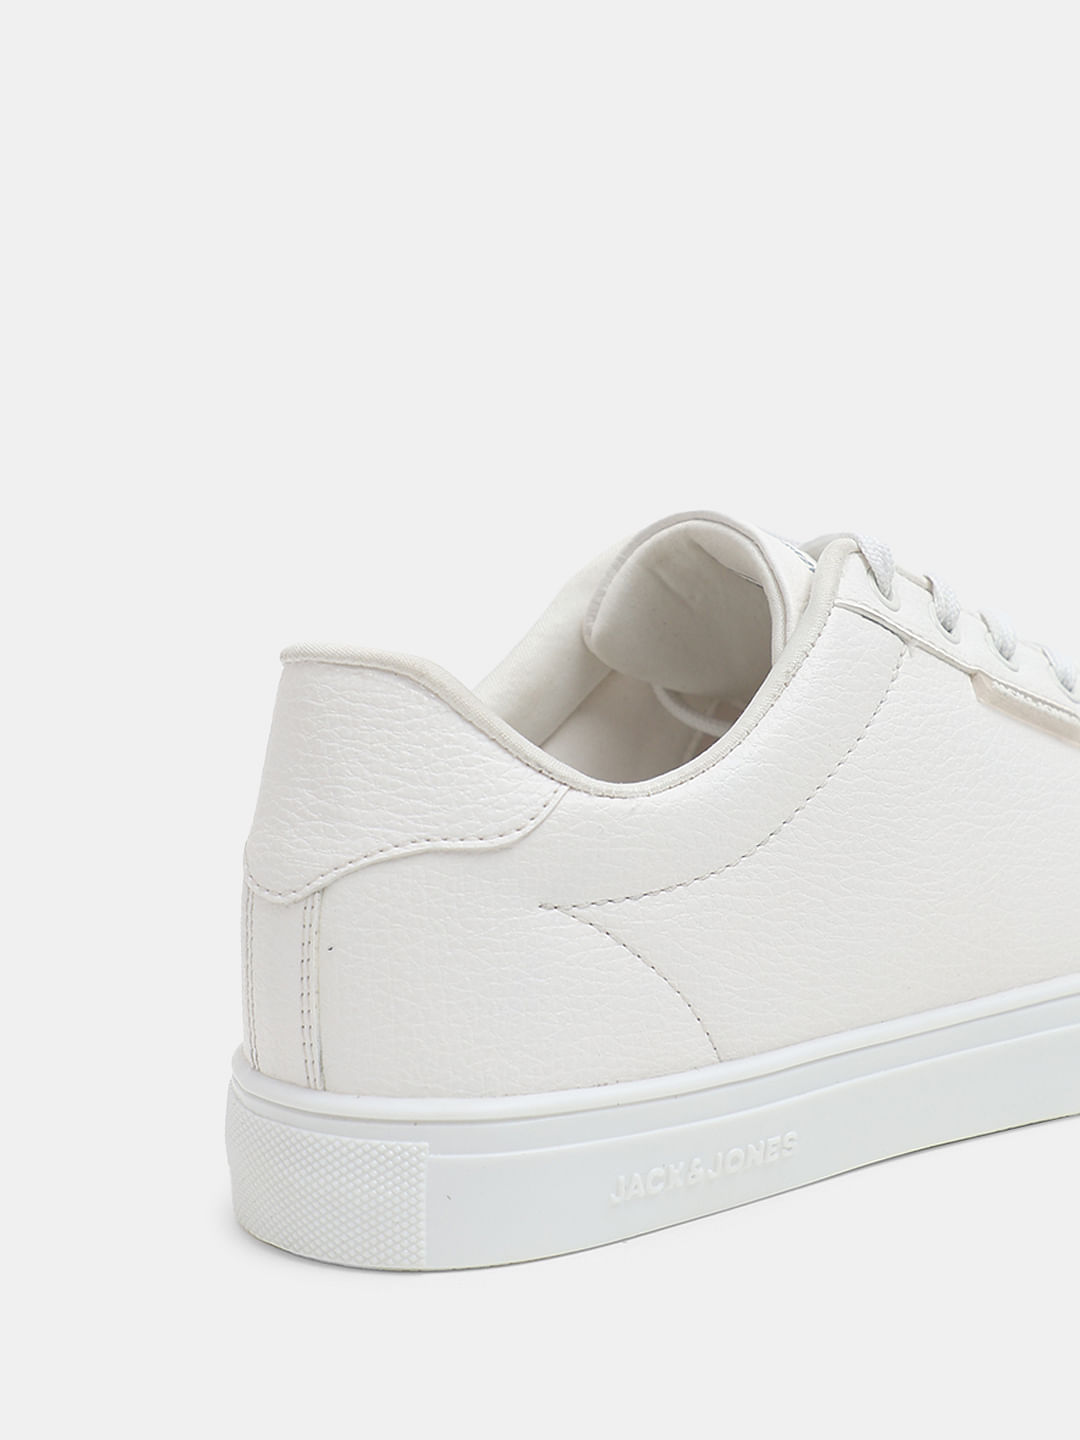 Men`s leather sneakers with a flat sole - white color - Baduglobal.com |  Sneakers, Leather sneakers, Sneakers men